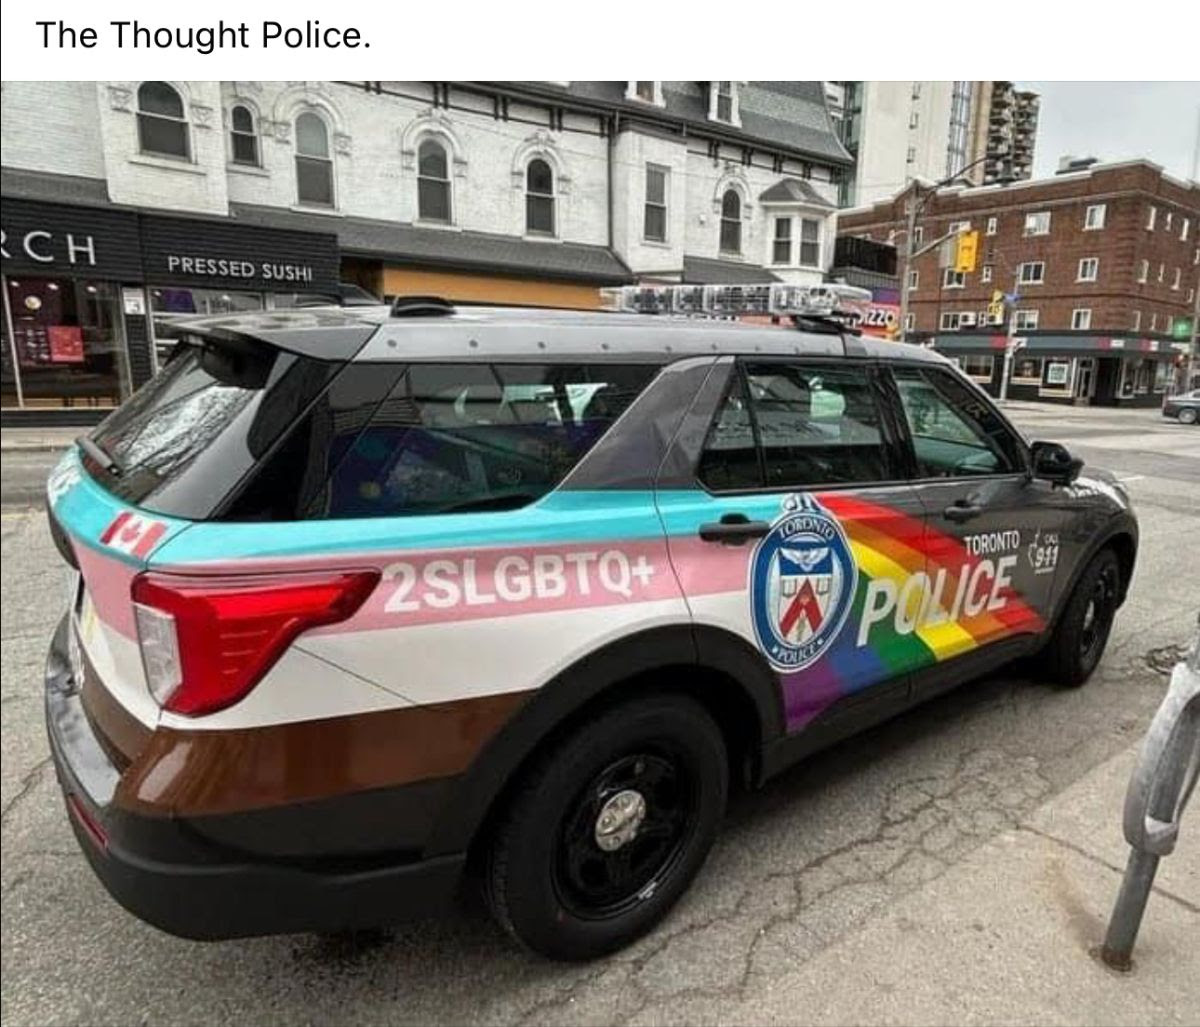 A toronto police car painted in gay themes.